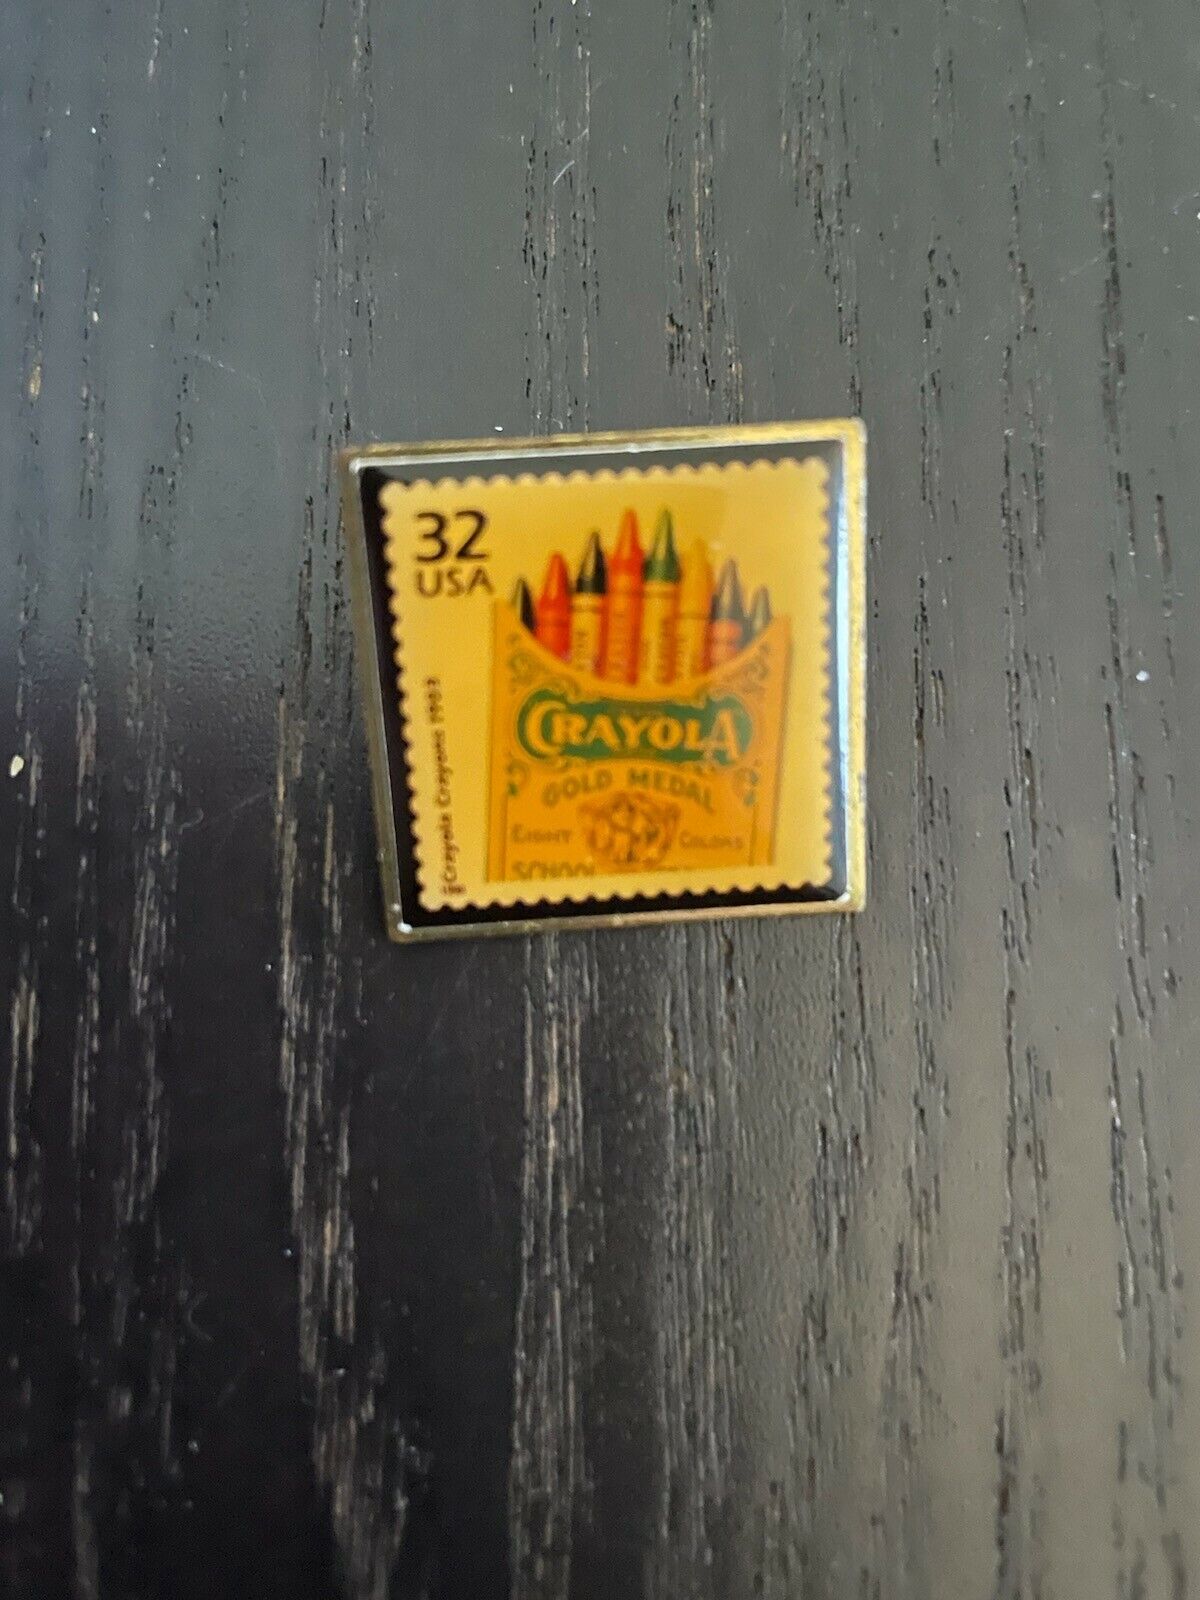 1998 USPS Crayola 32 cent Postage Stamp Pin made in USA